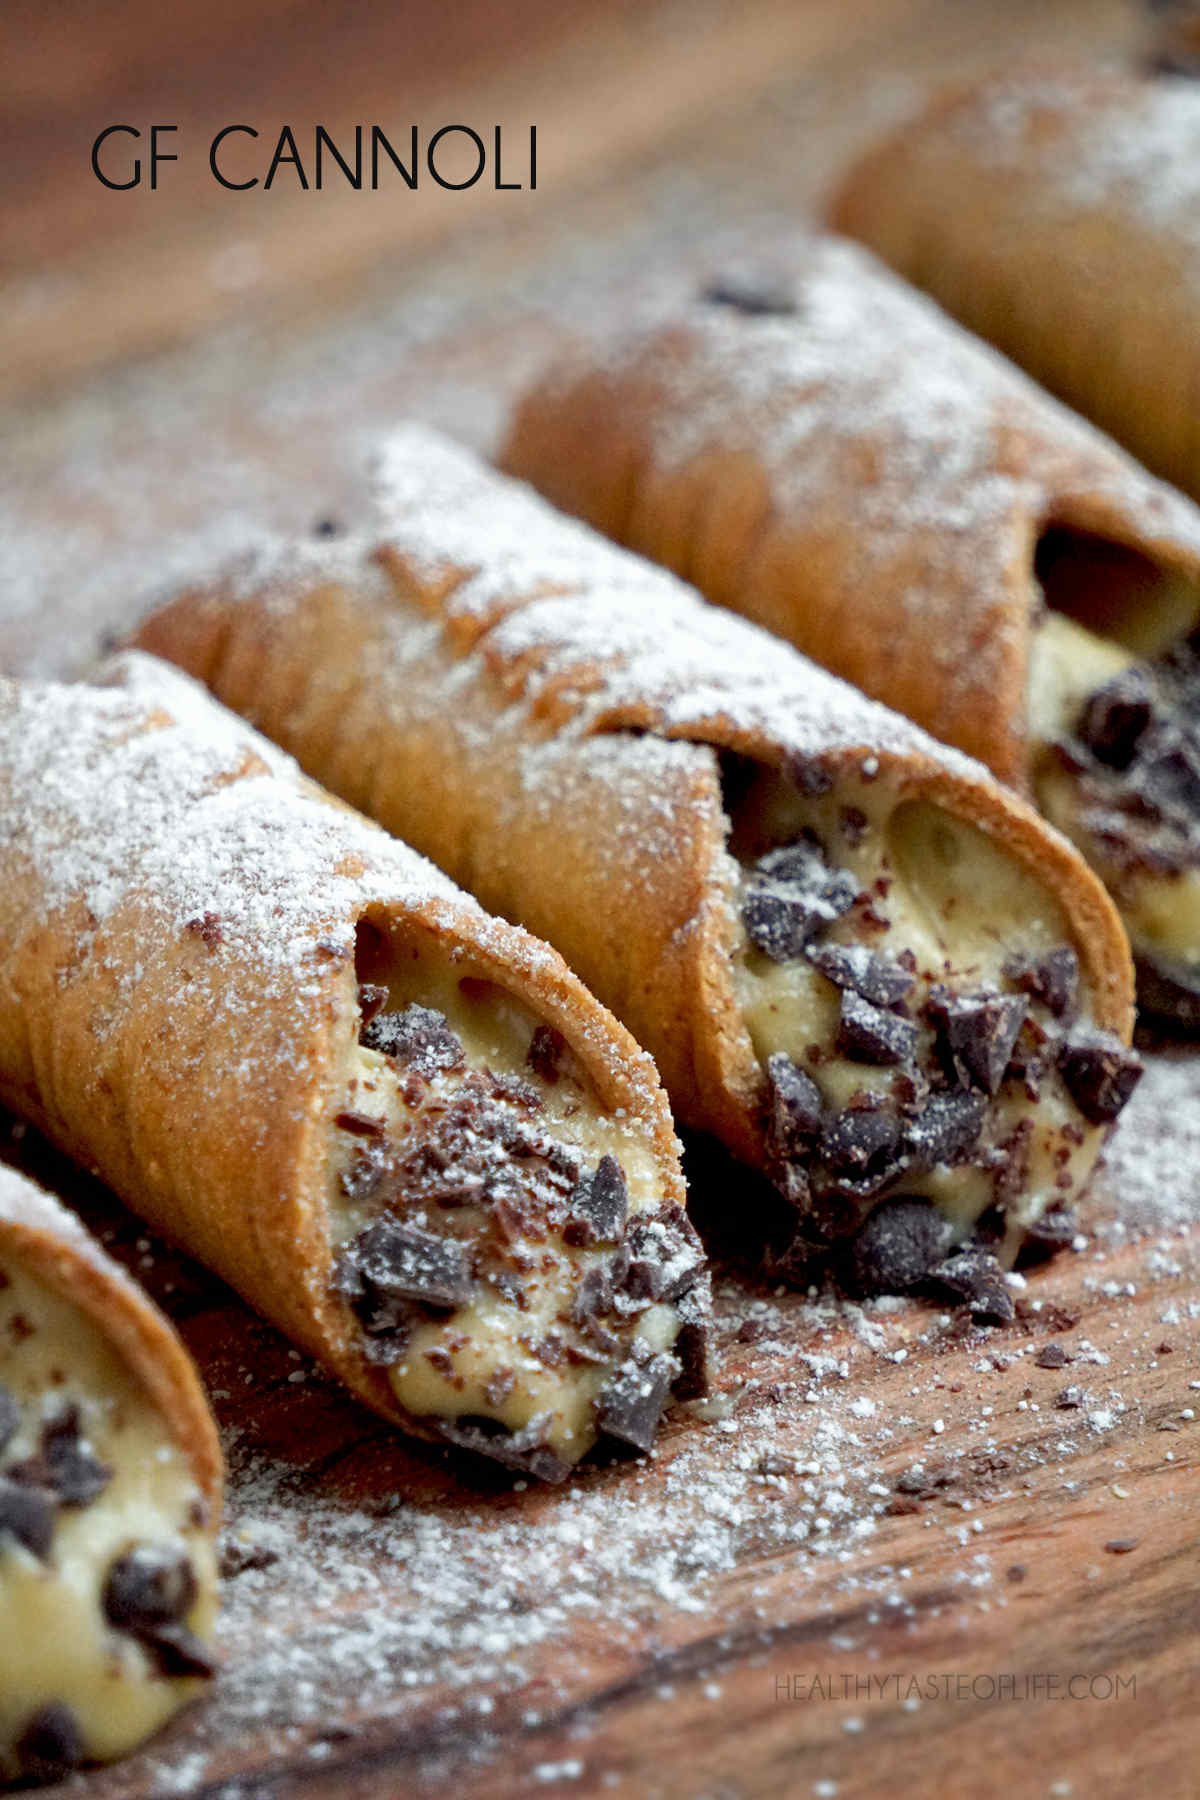 Gluten free cannoli shells filled with dairy free willing (no cheese).